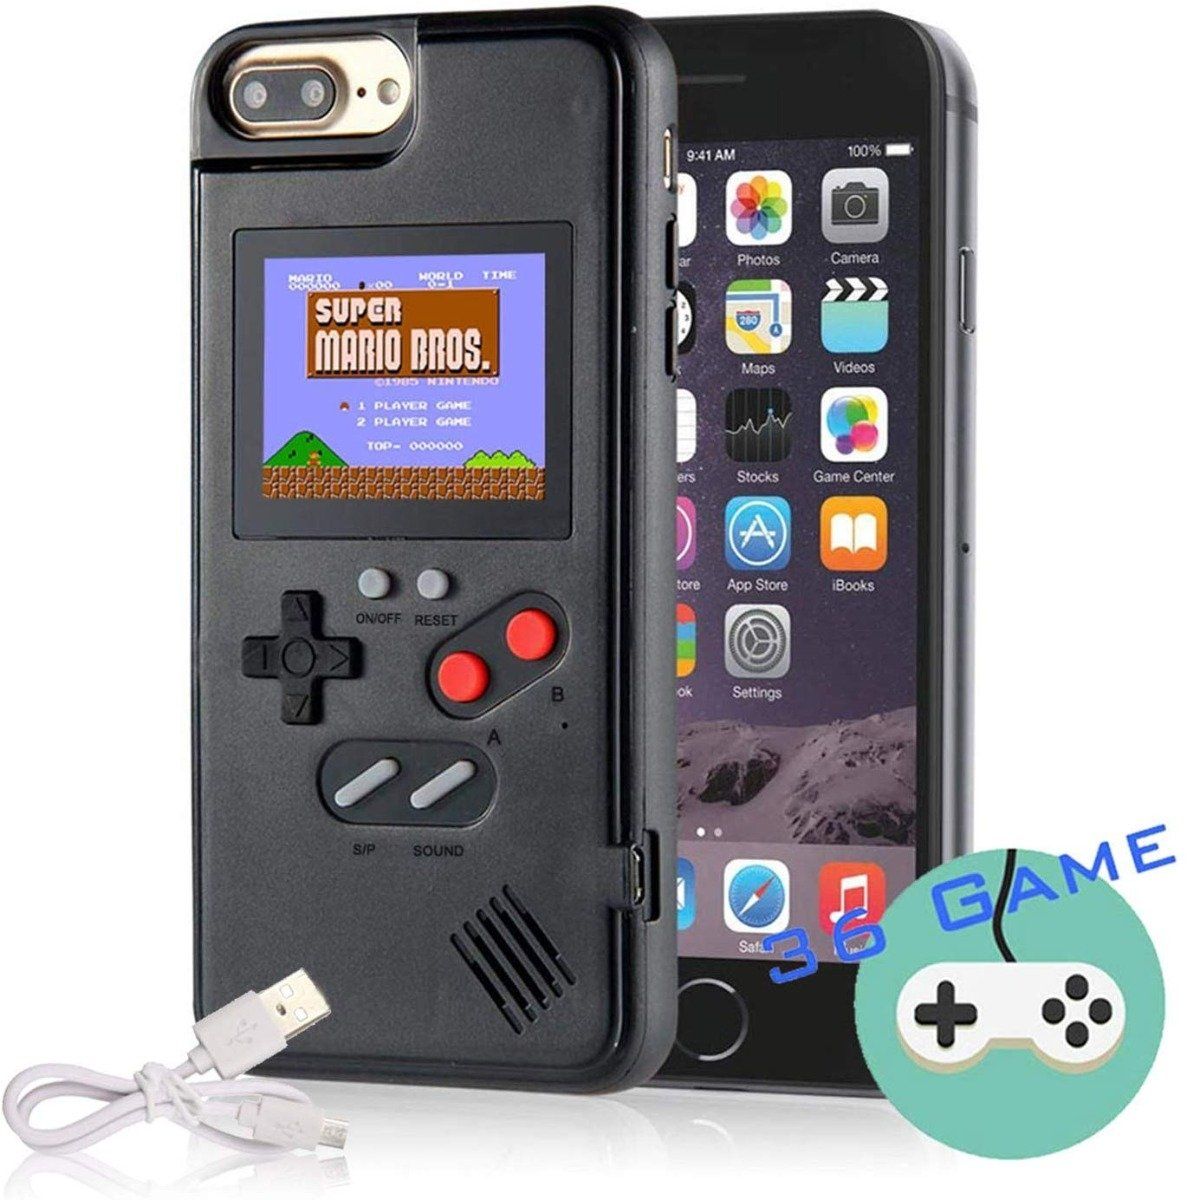 Retro Gaming Case 36 Games in 1 for iPhone and Samsung Phone / Black